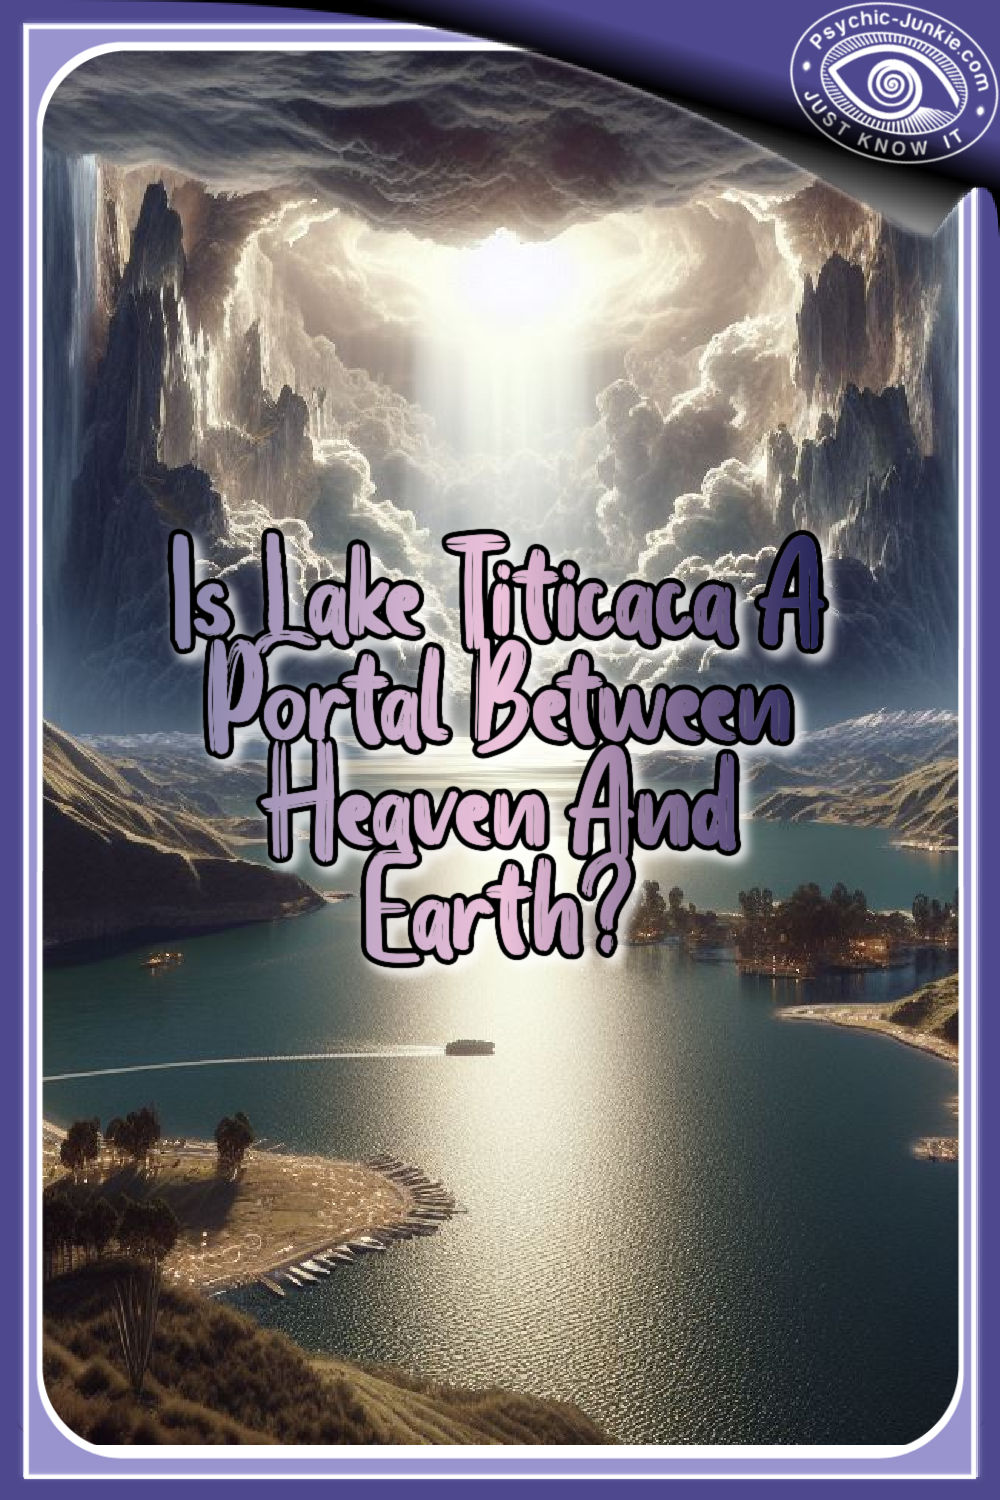 Is Lake Titicaca Portal Between Heaven And Earth?